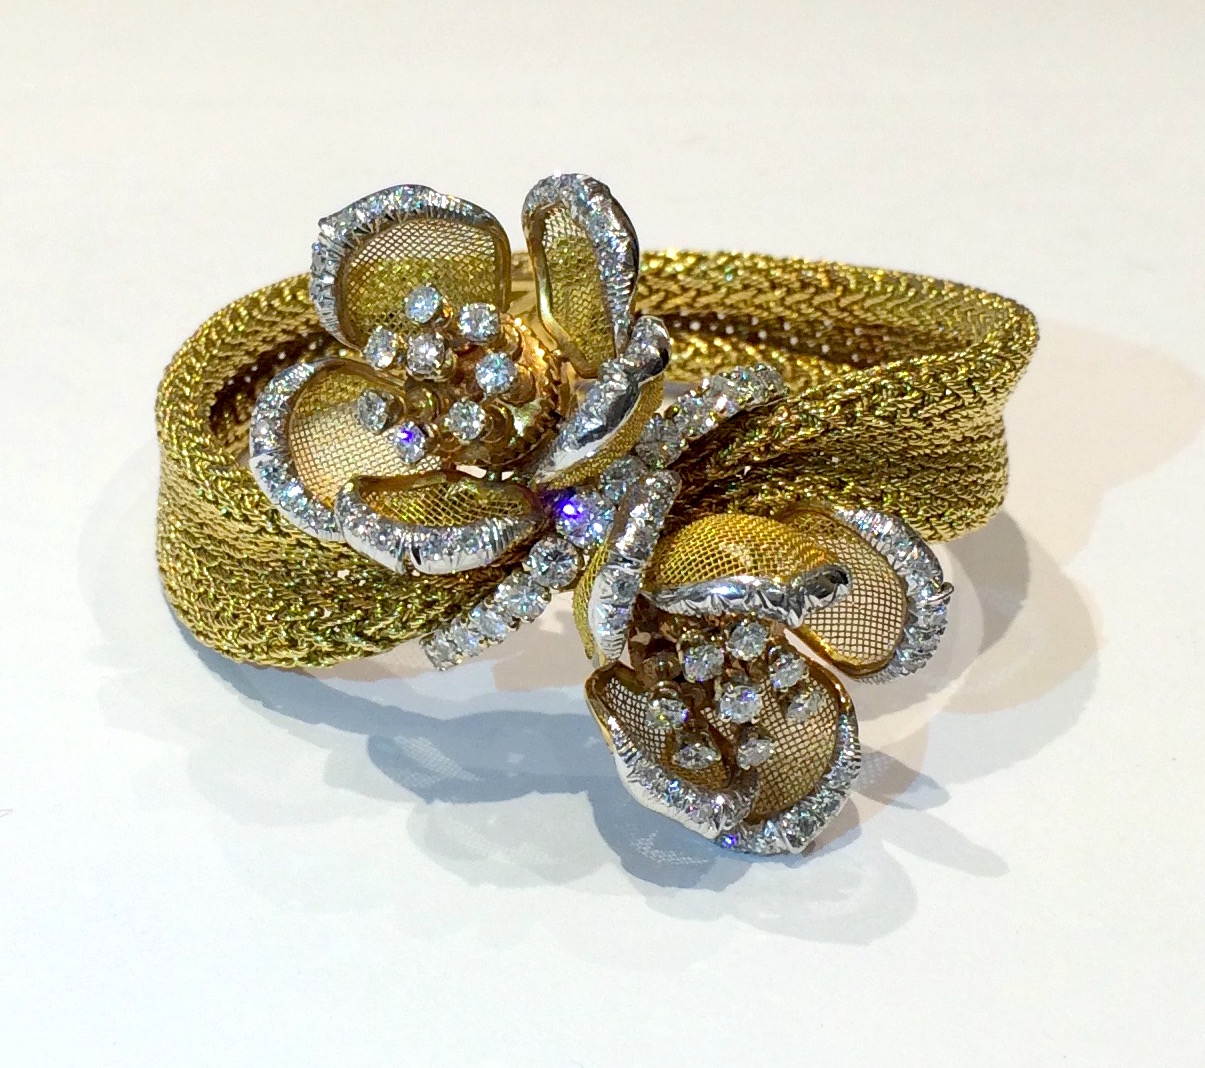 Piaget “Day and Night” flower bracelet with articulated petals and en tremblent stamens, 18K yellow gold and set with diamonds (approx. 4 carats), signed: J L in a diamond French maker’s mark, French Mercury mark for 18k and made for Export (3x), Made in France, c. 1950’s